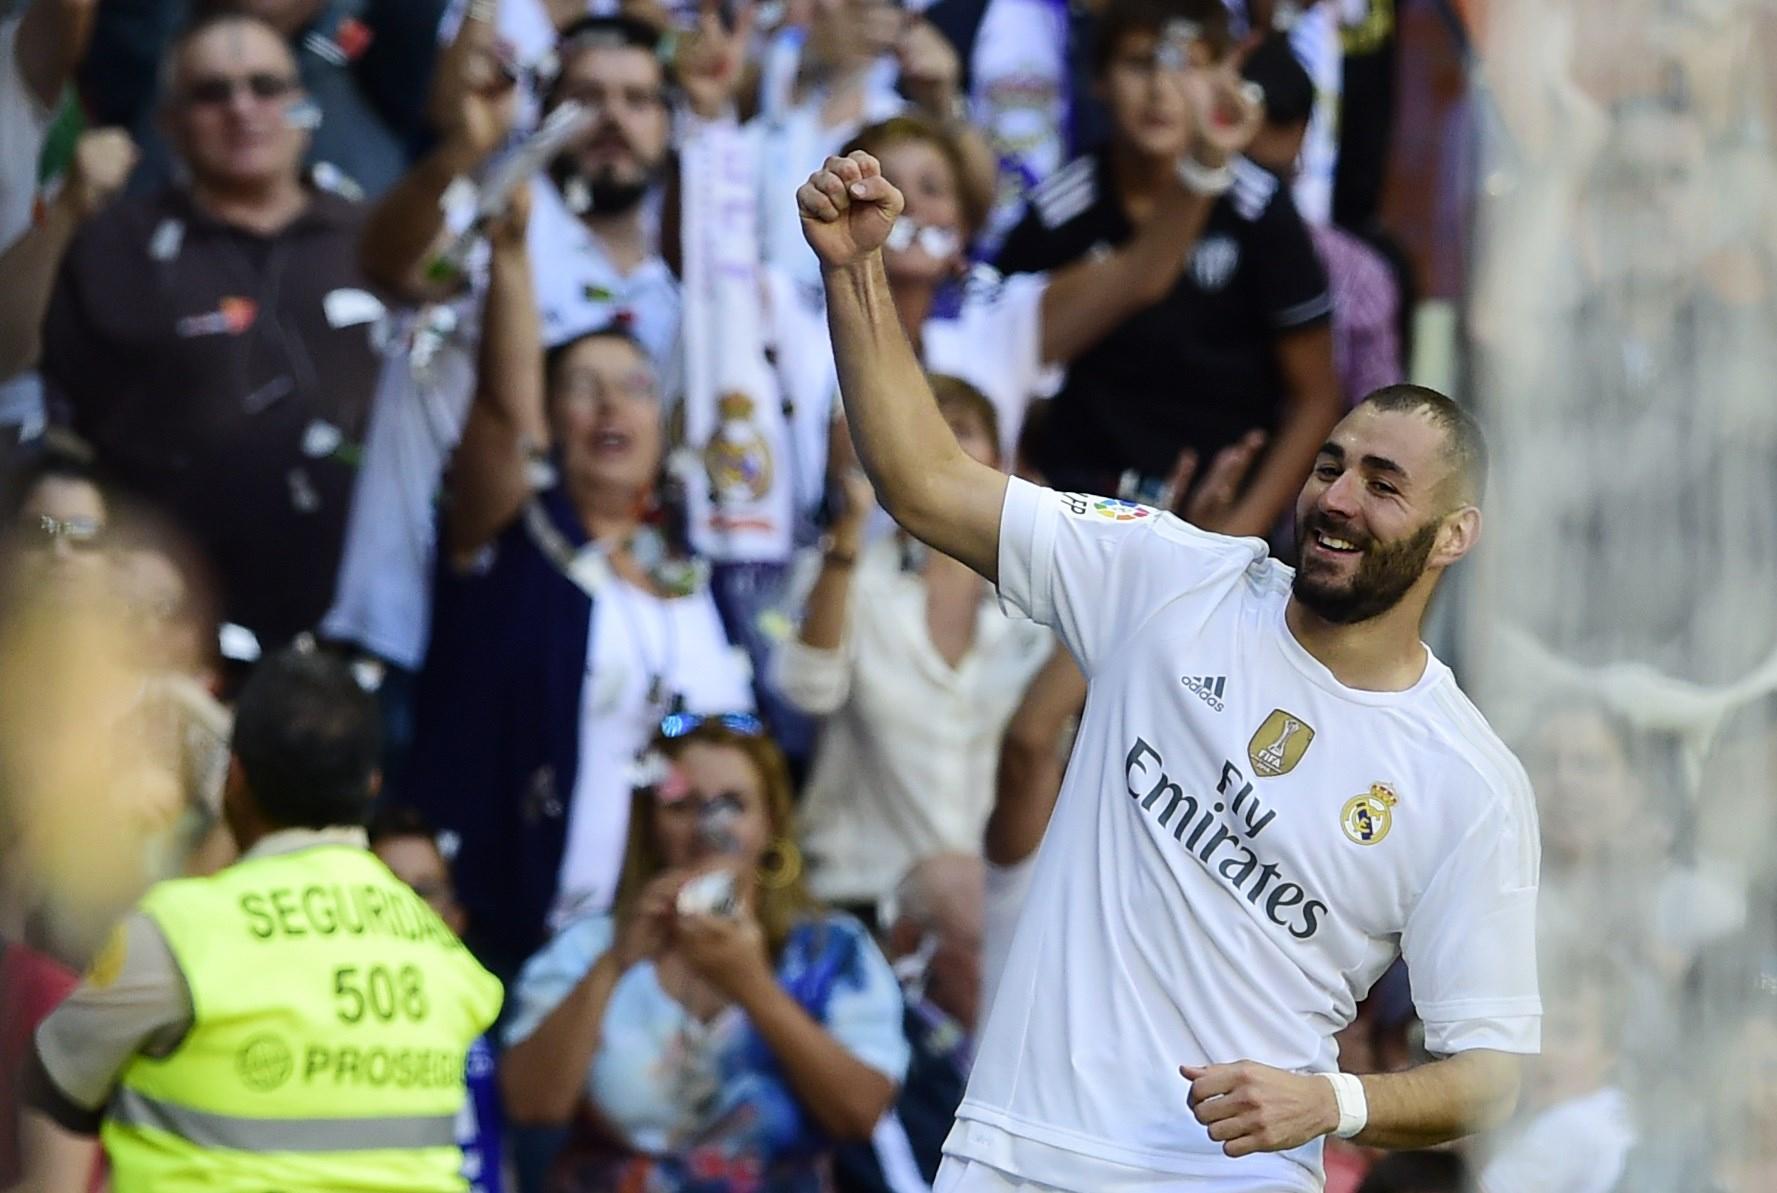 Real Madrid's French forward Karim Benzema celebrates after scoring a goal during the Spanish league football match Real Madrid CF vs Granada FC at the Santiago Bernabeu stadium in Madrid on Spetember 19, 2015. AFP PHOTO/ JAVIER SORIANO (Photo credit should read JAVIER SORIANO/AFP/Getty Images)